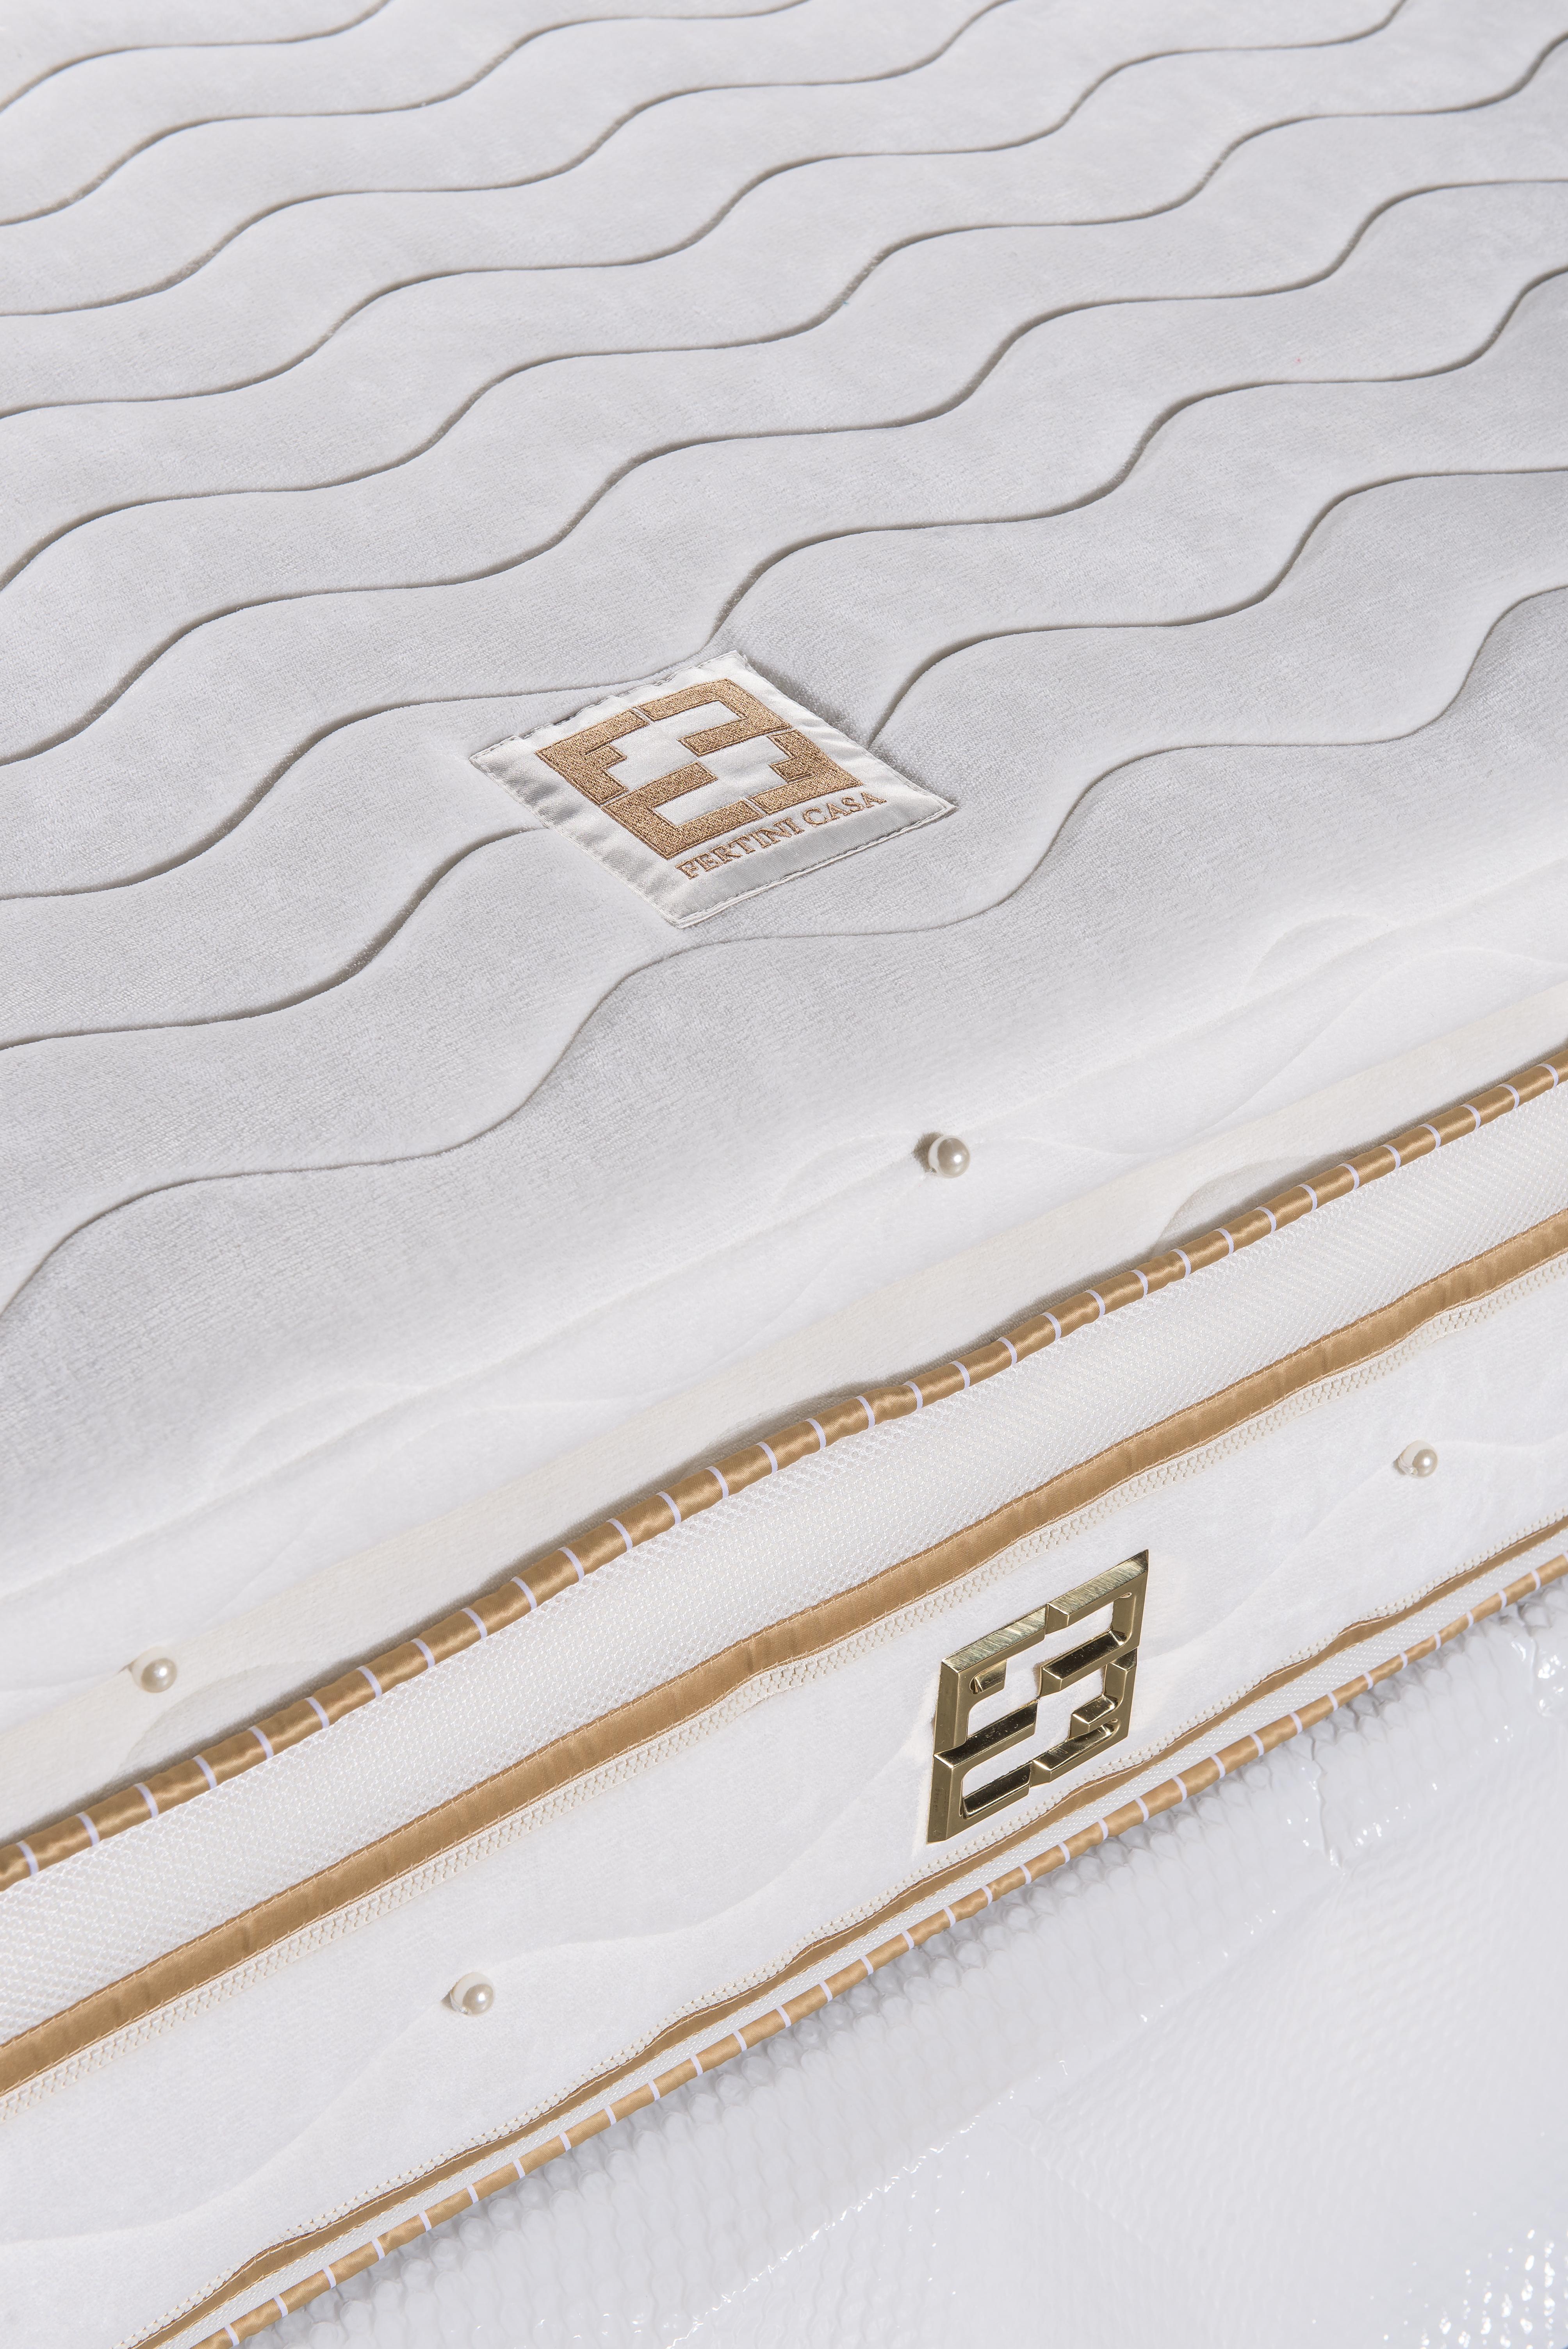 The royal comfort mattress is top of the range mattress. This luxurious mattress features latex, memory foam wrapped around a unique hourglass shaped pocket spring system – each geometrically advanced pocket spring provides seamless progressive